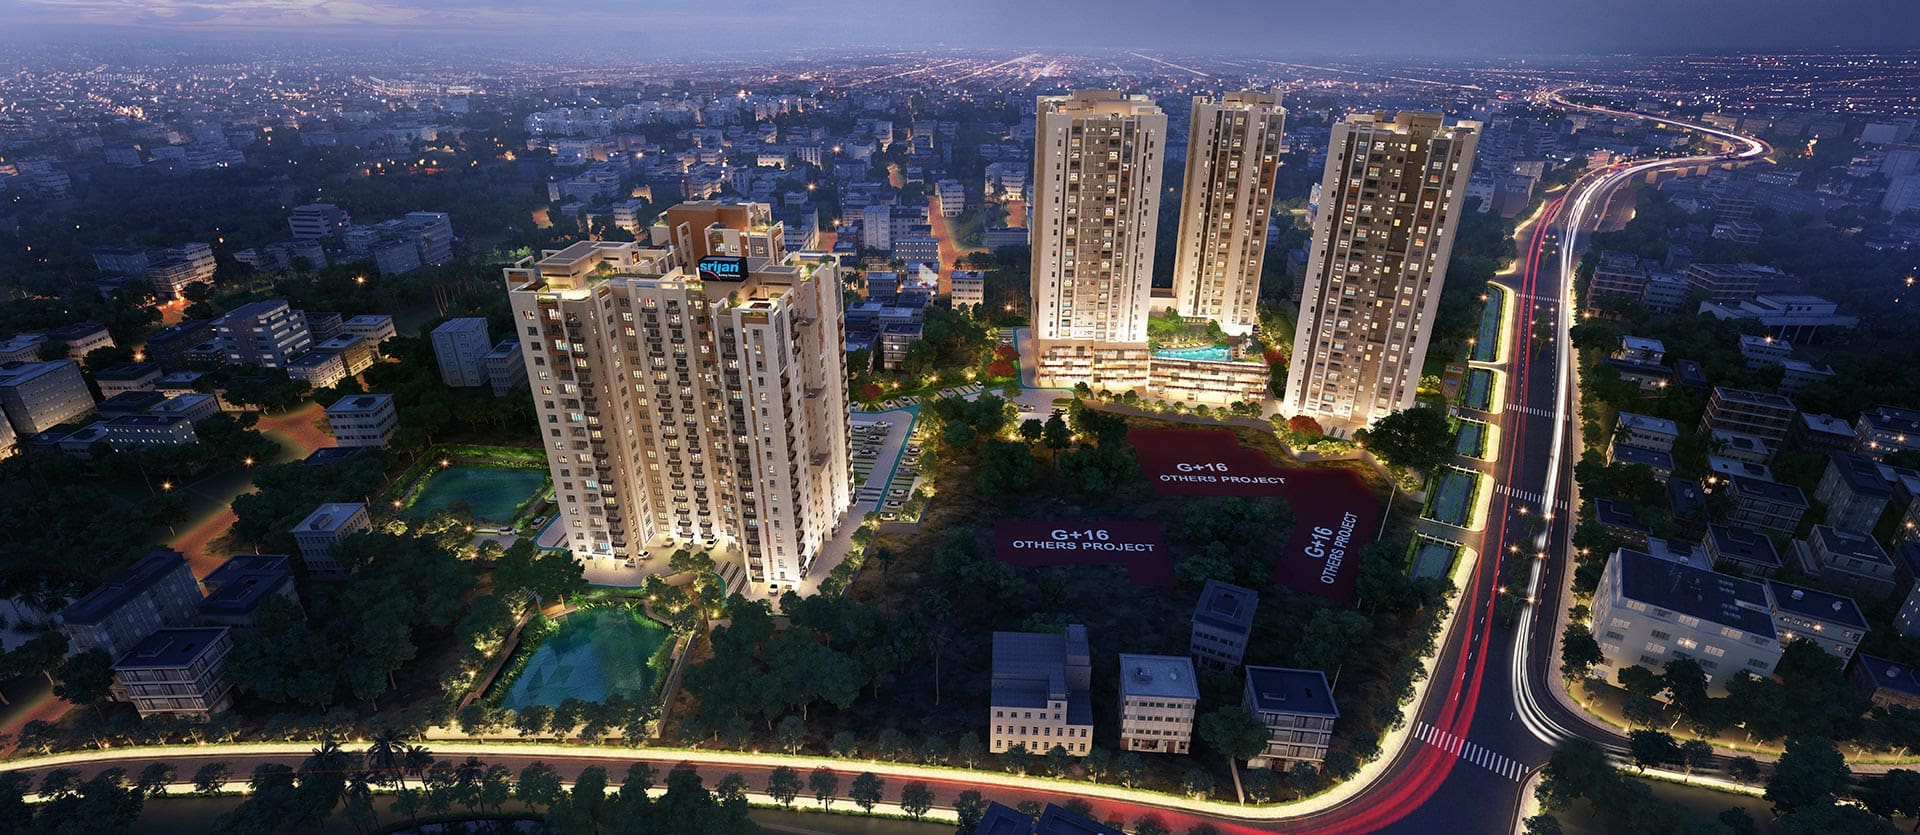 Best Flats in Kolkata For Home Buyers in 2022